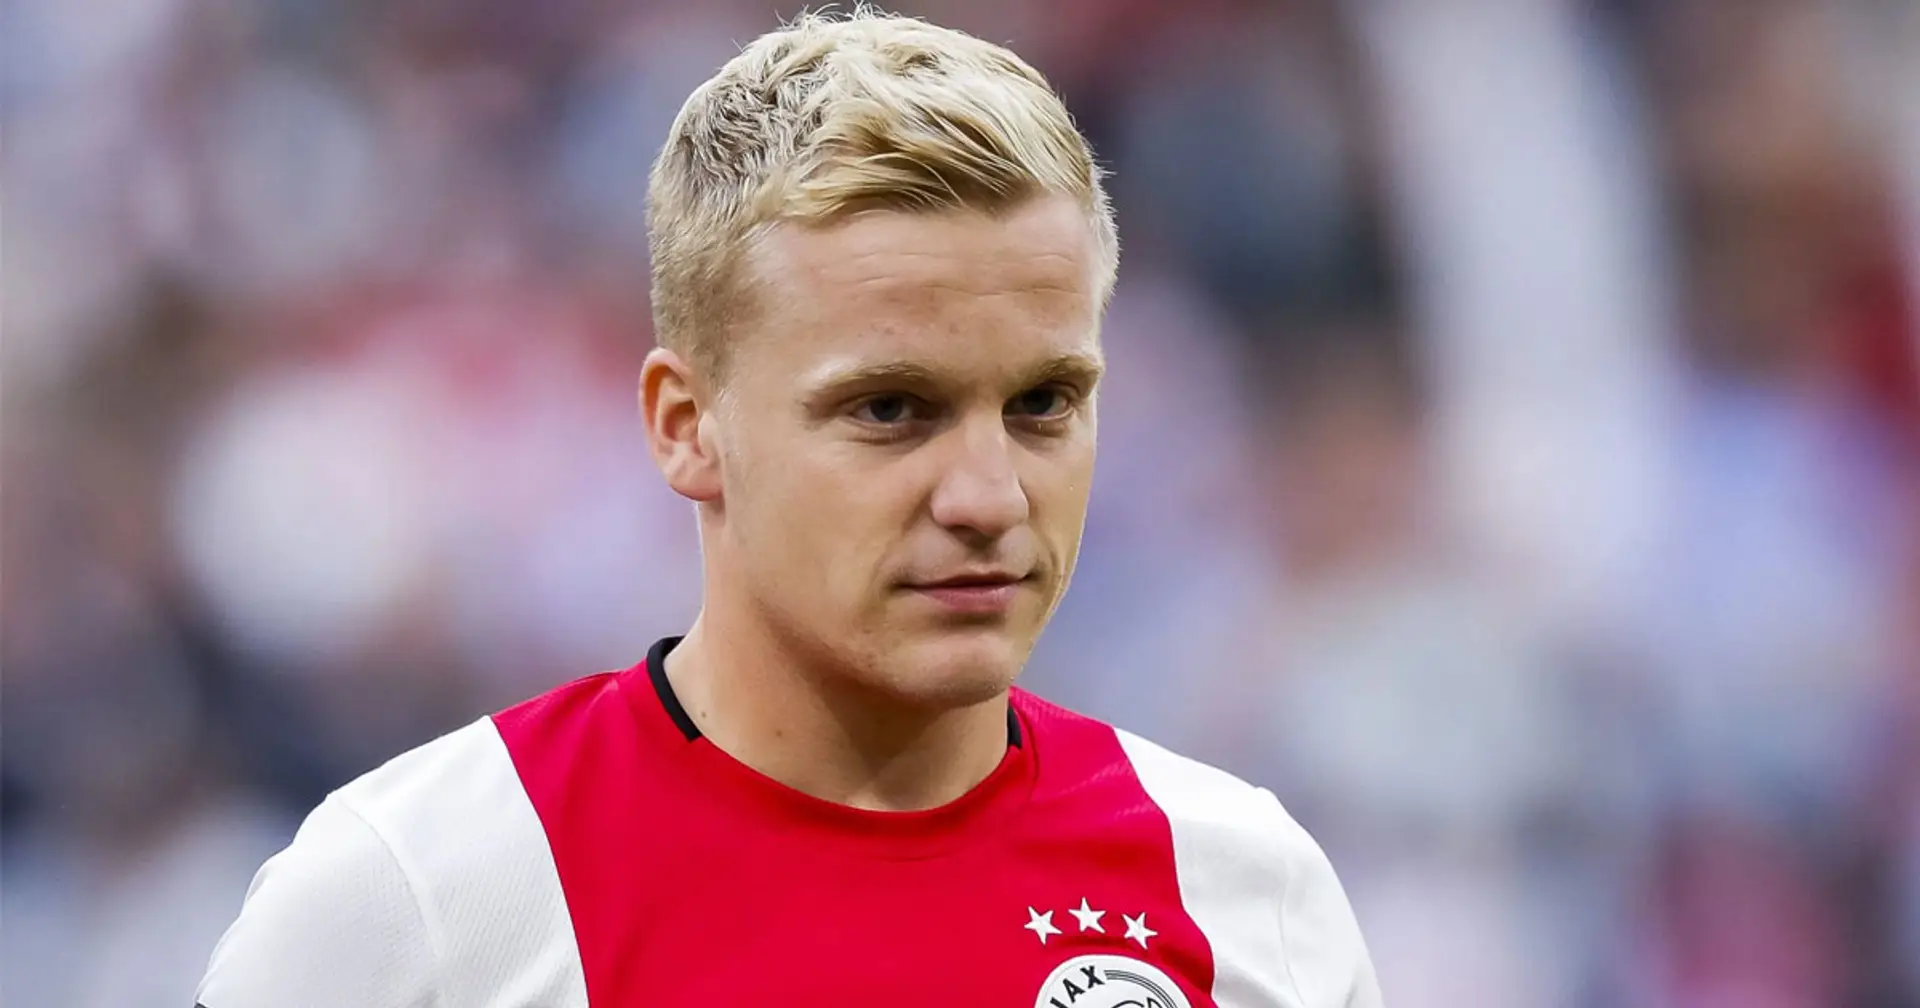 Donny van de Beek revealed as Eredivisie’s most valuable player ahead of United move